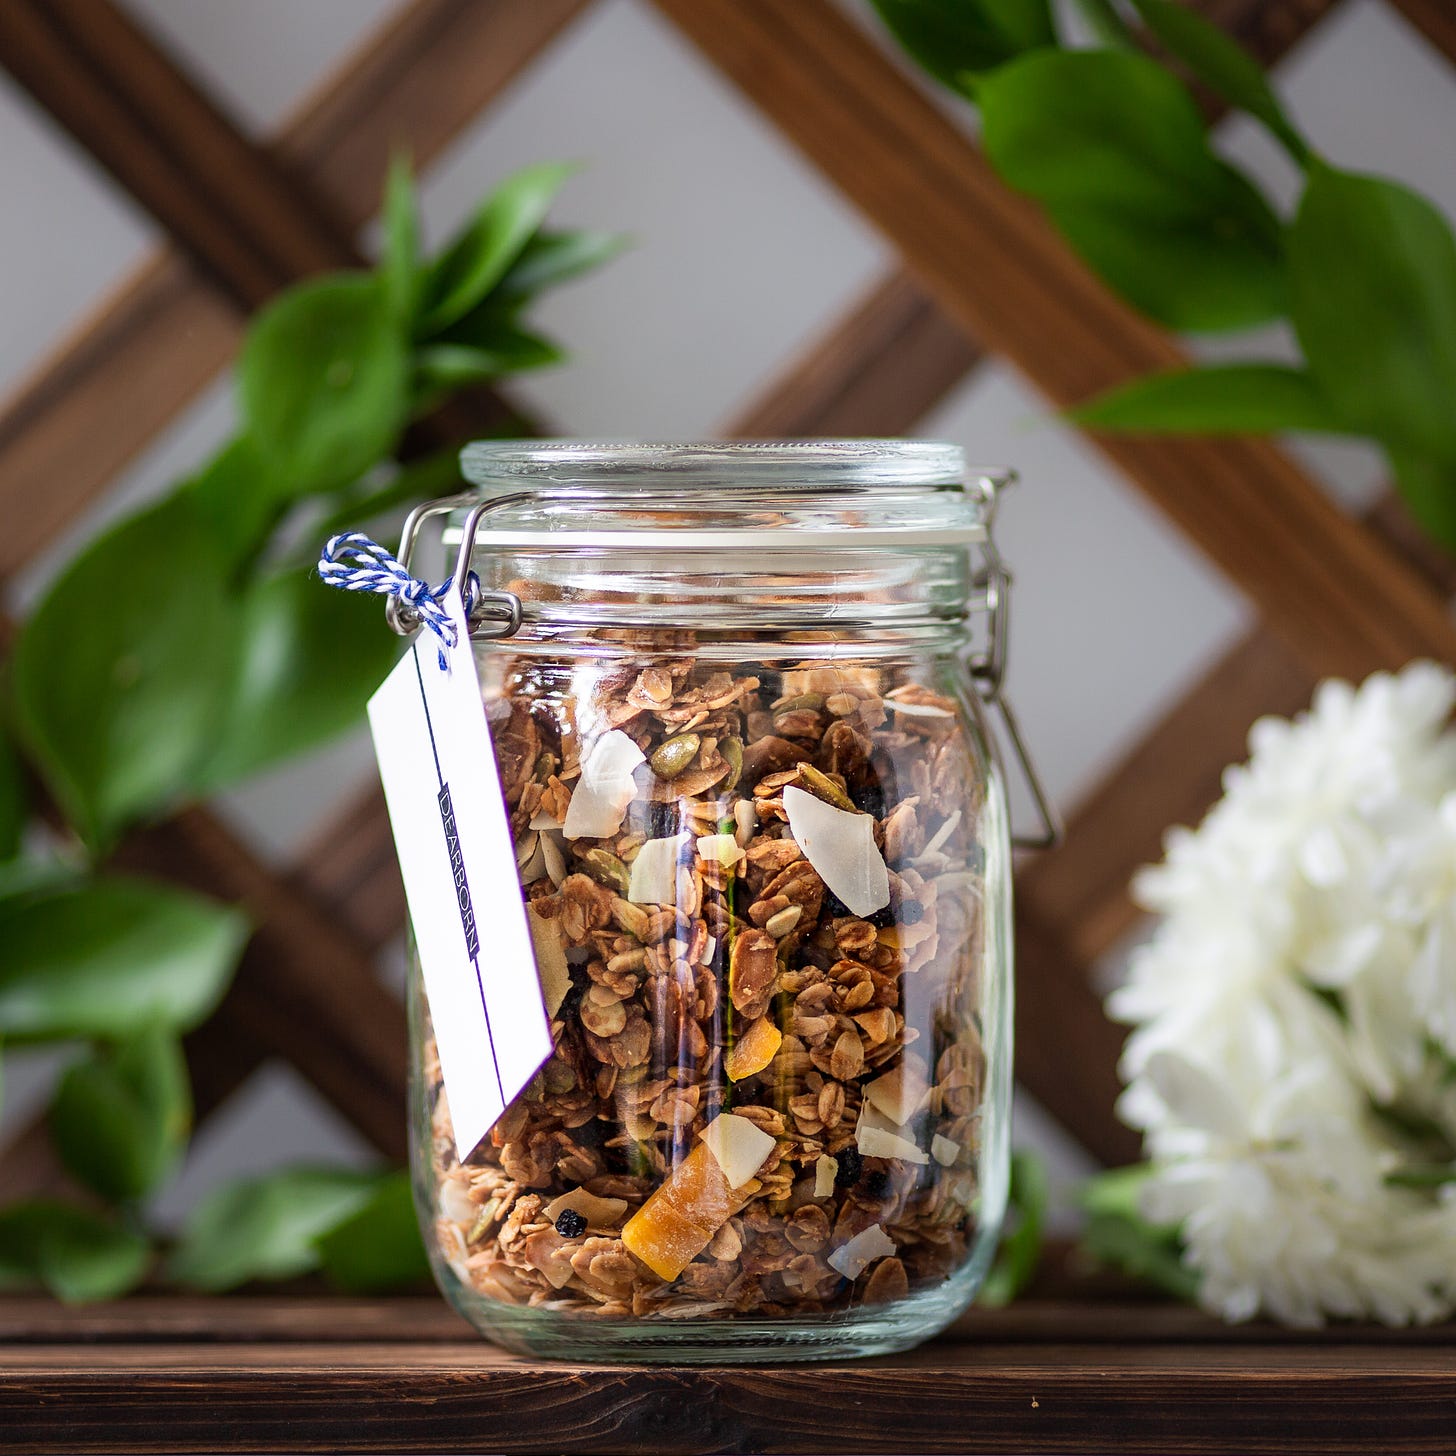 Dearborn’s jars of granola are usually quickly snapped up once a new batch is announced on its Instagram account every Monday noon.